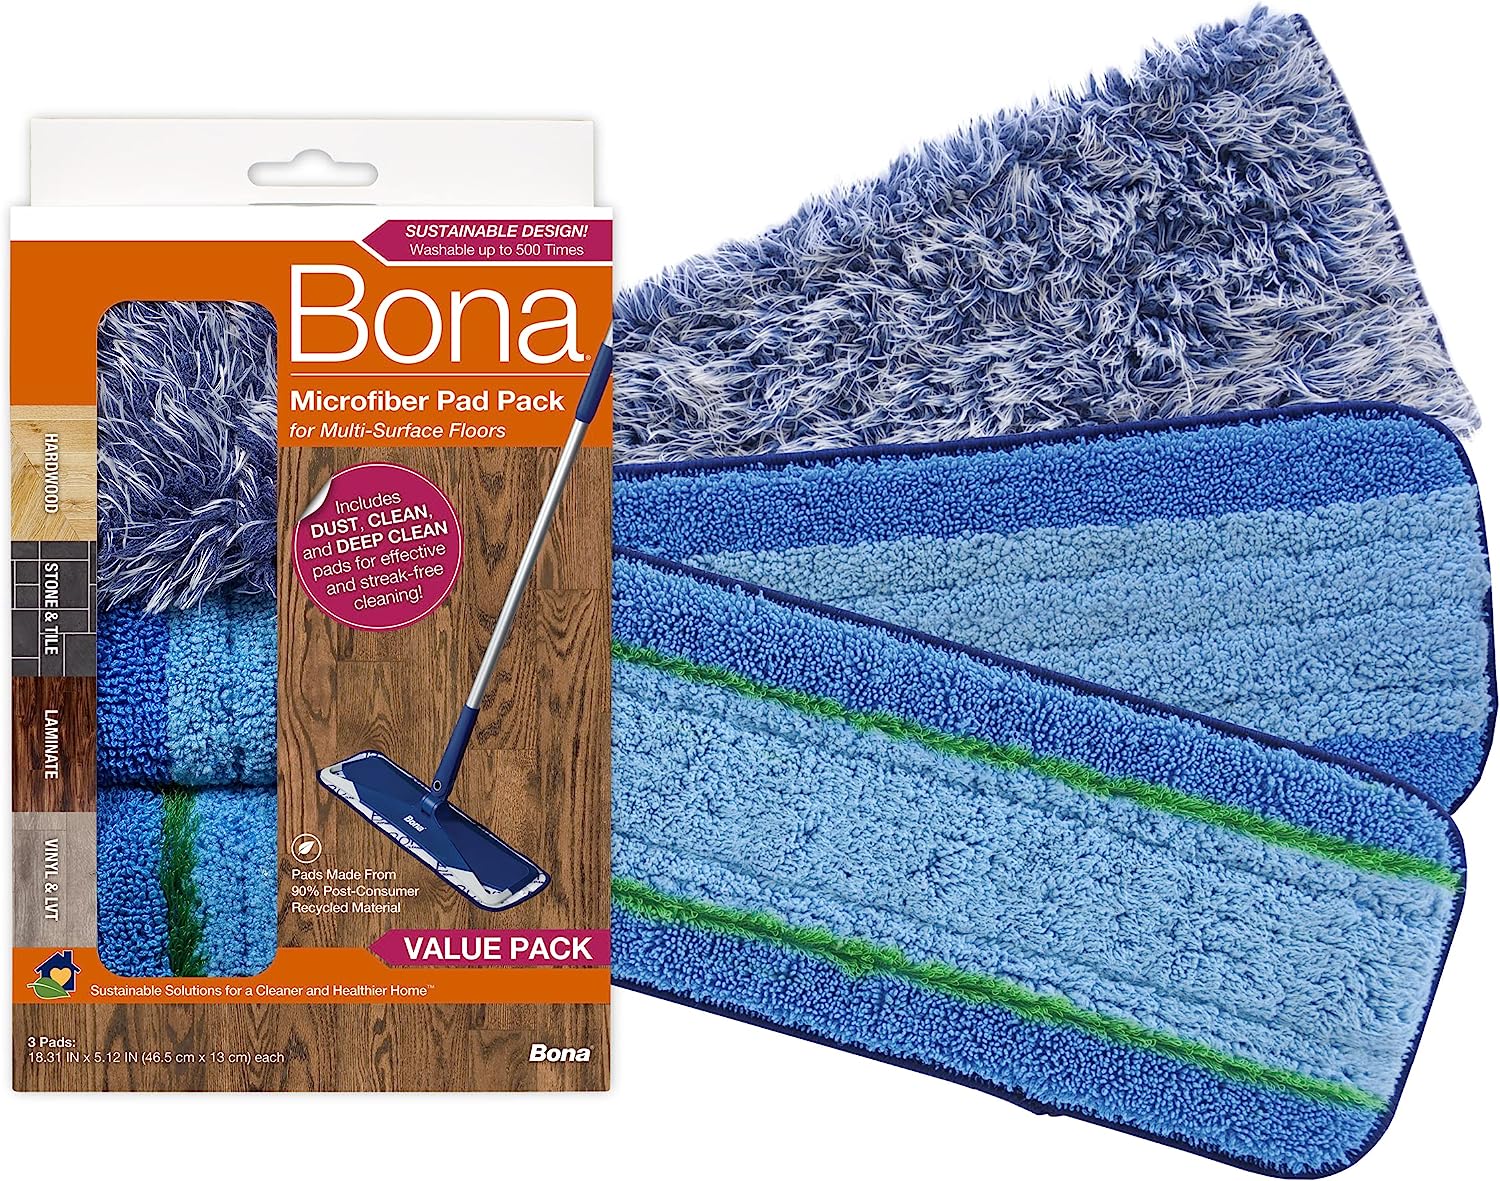 Bona Microfiber Pad 3-Pack includes Dusting, Cleaning, [...]